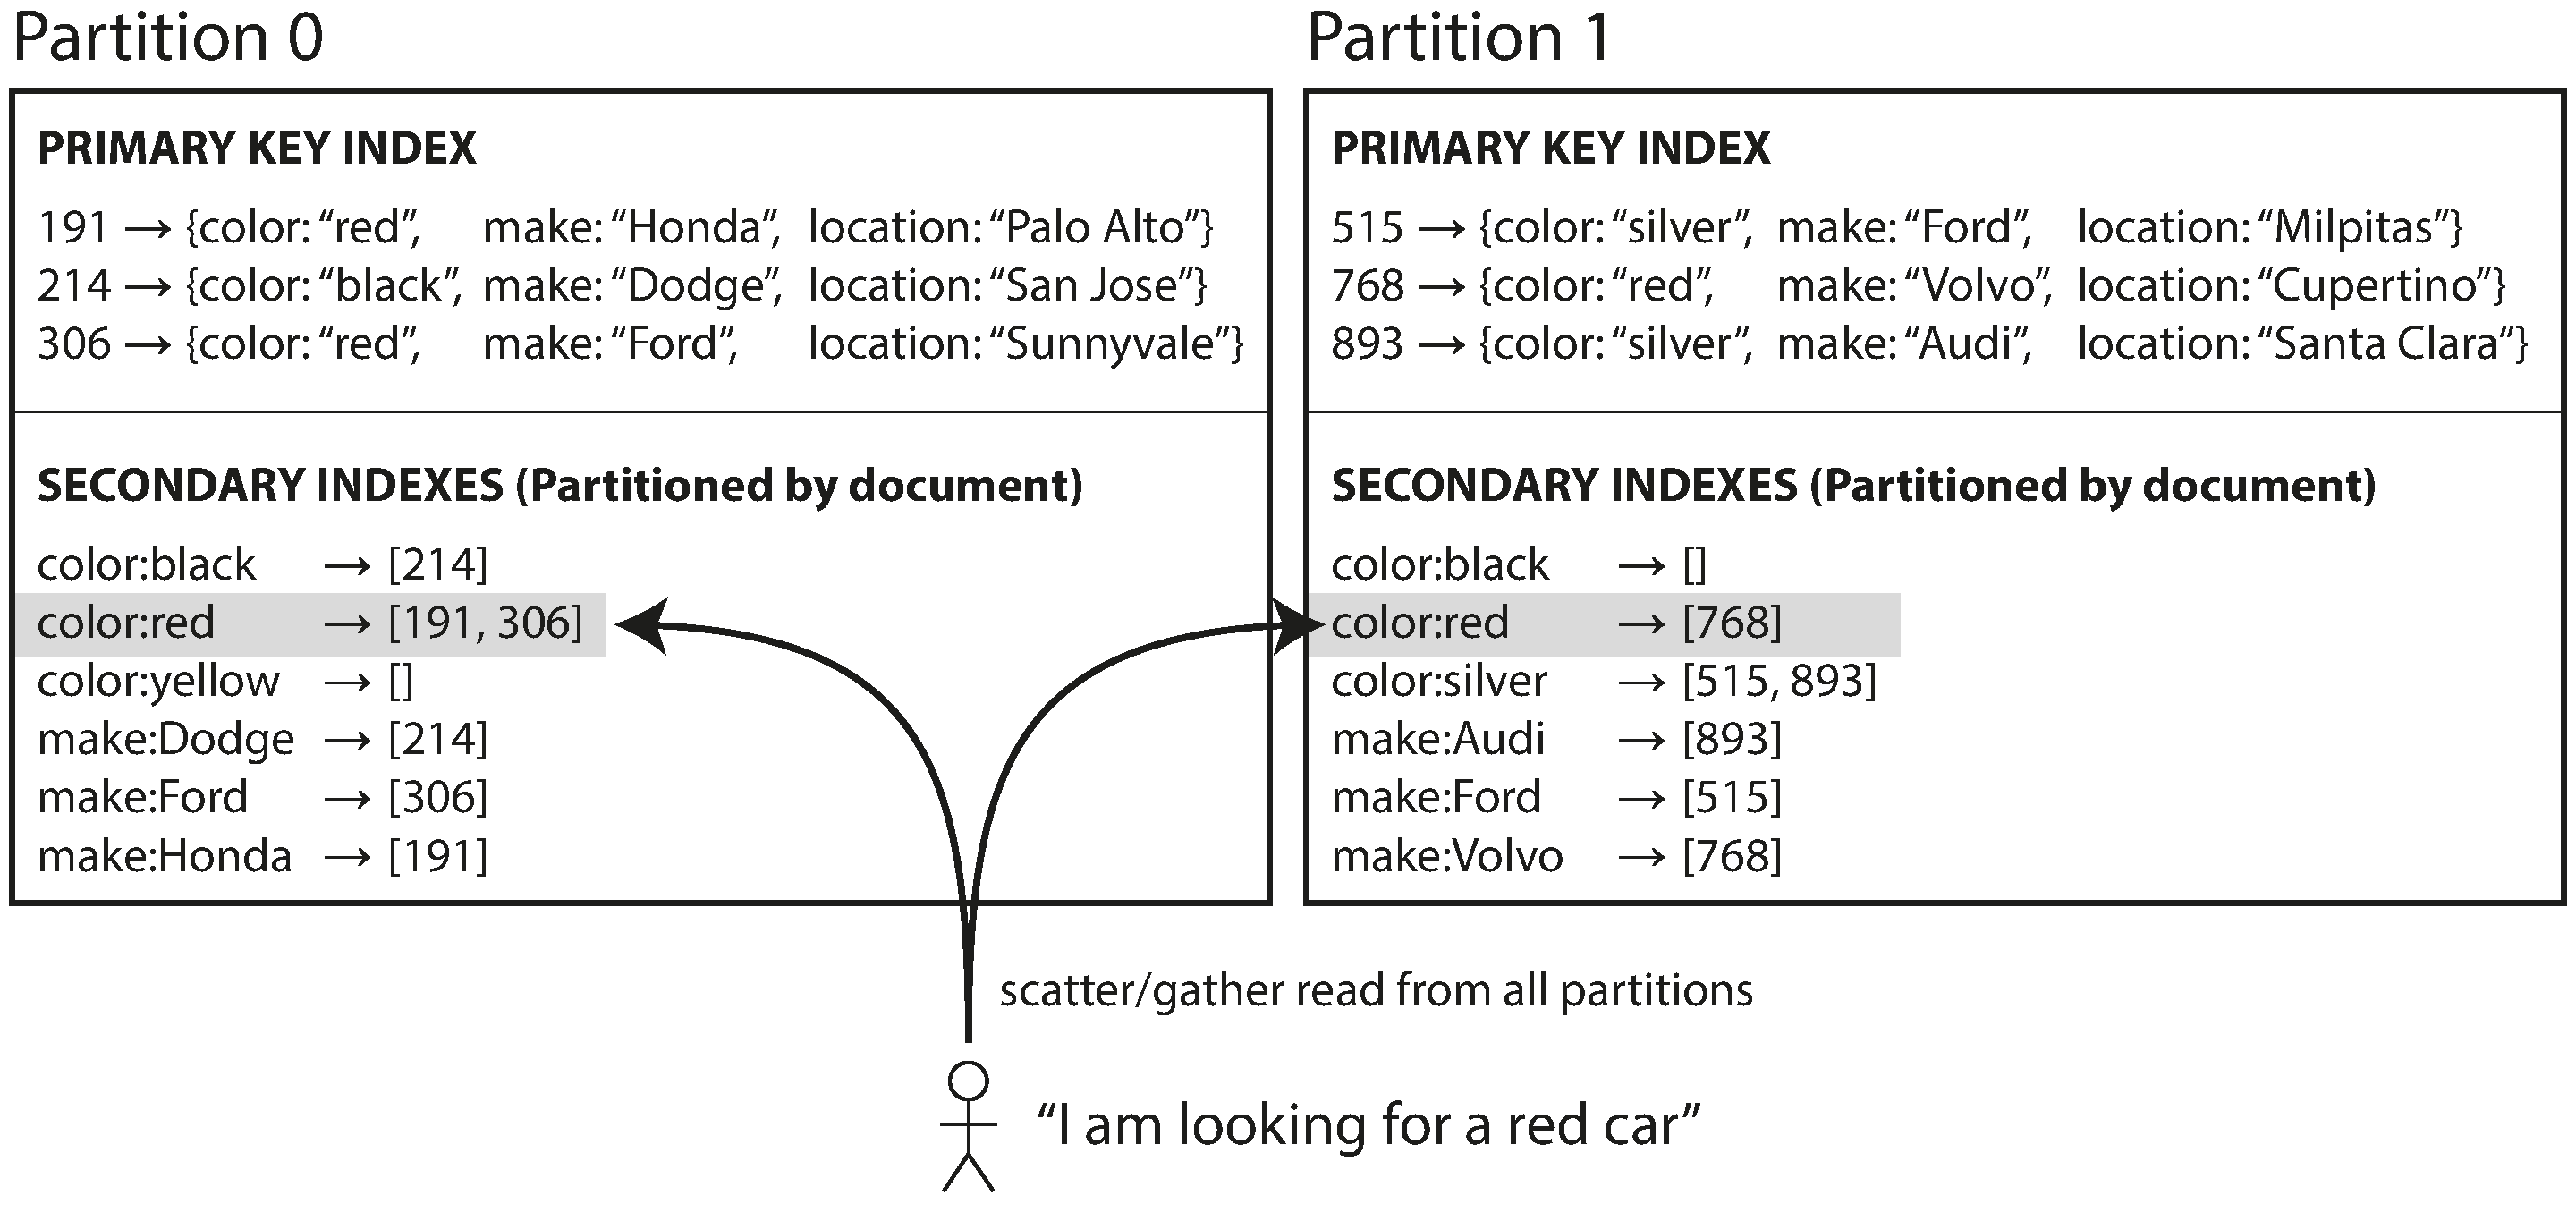 Figure 6-4. Partitioning secondary indexes by document